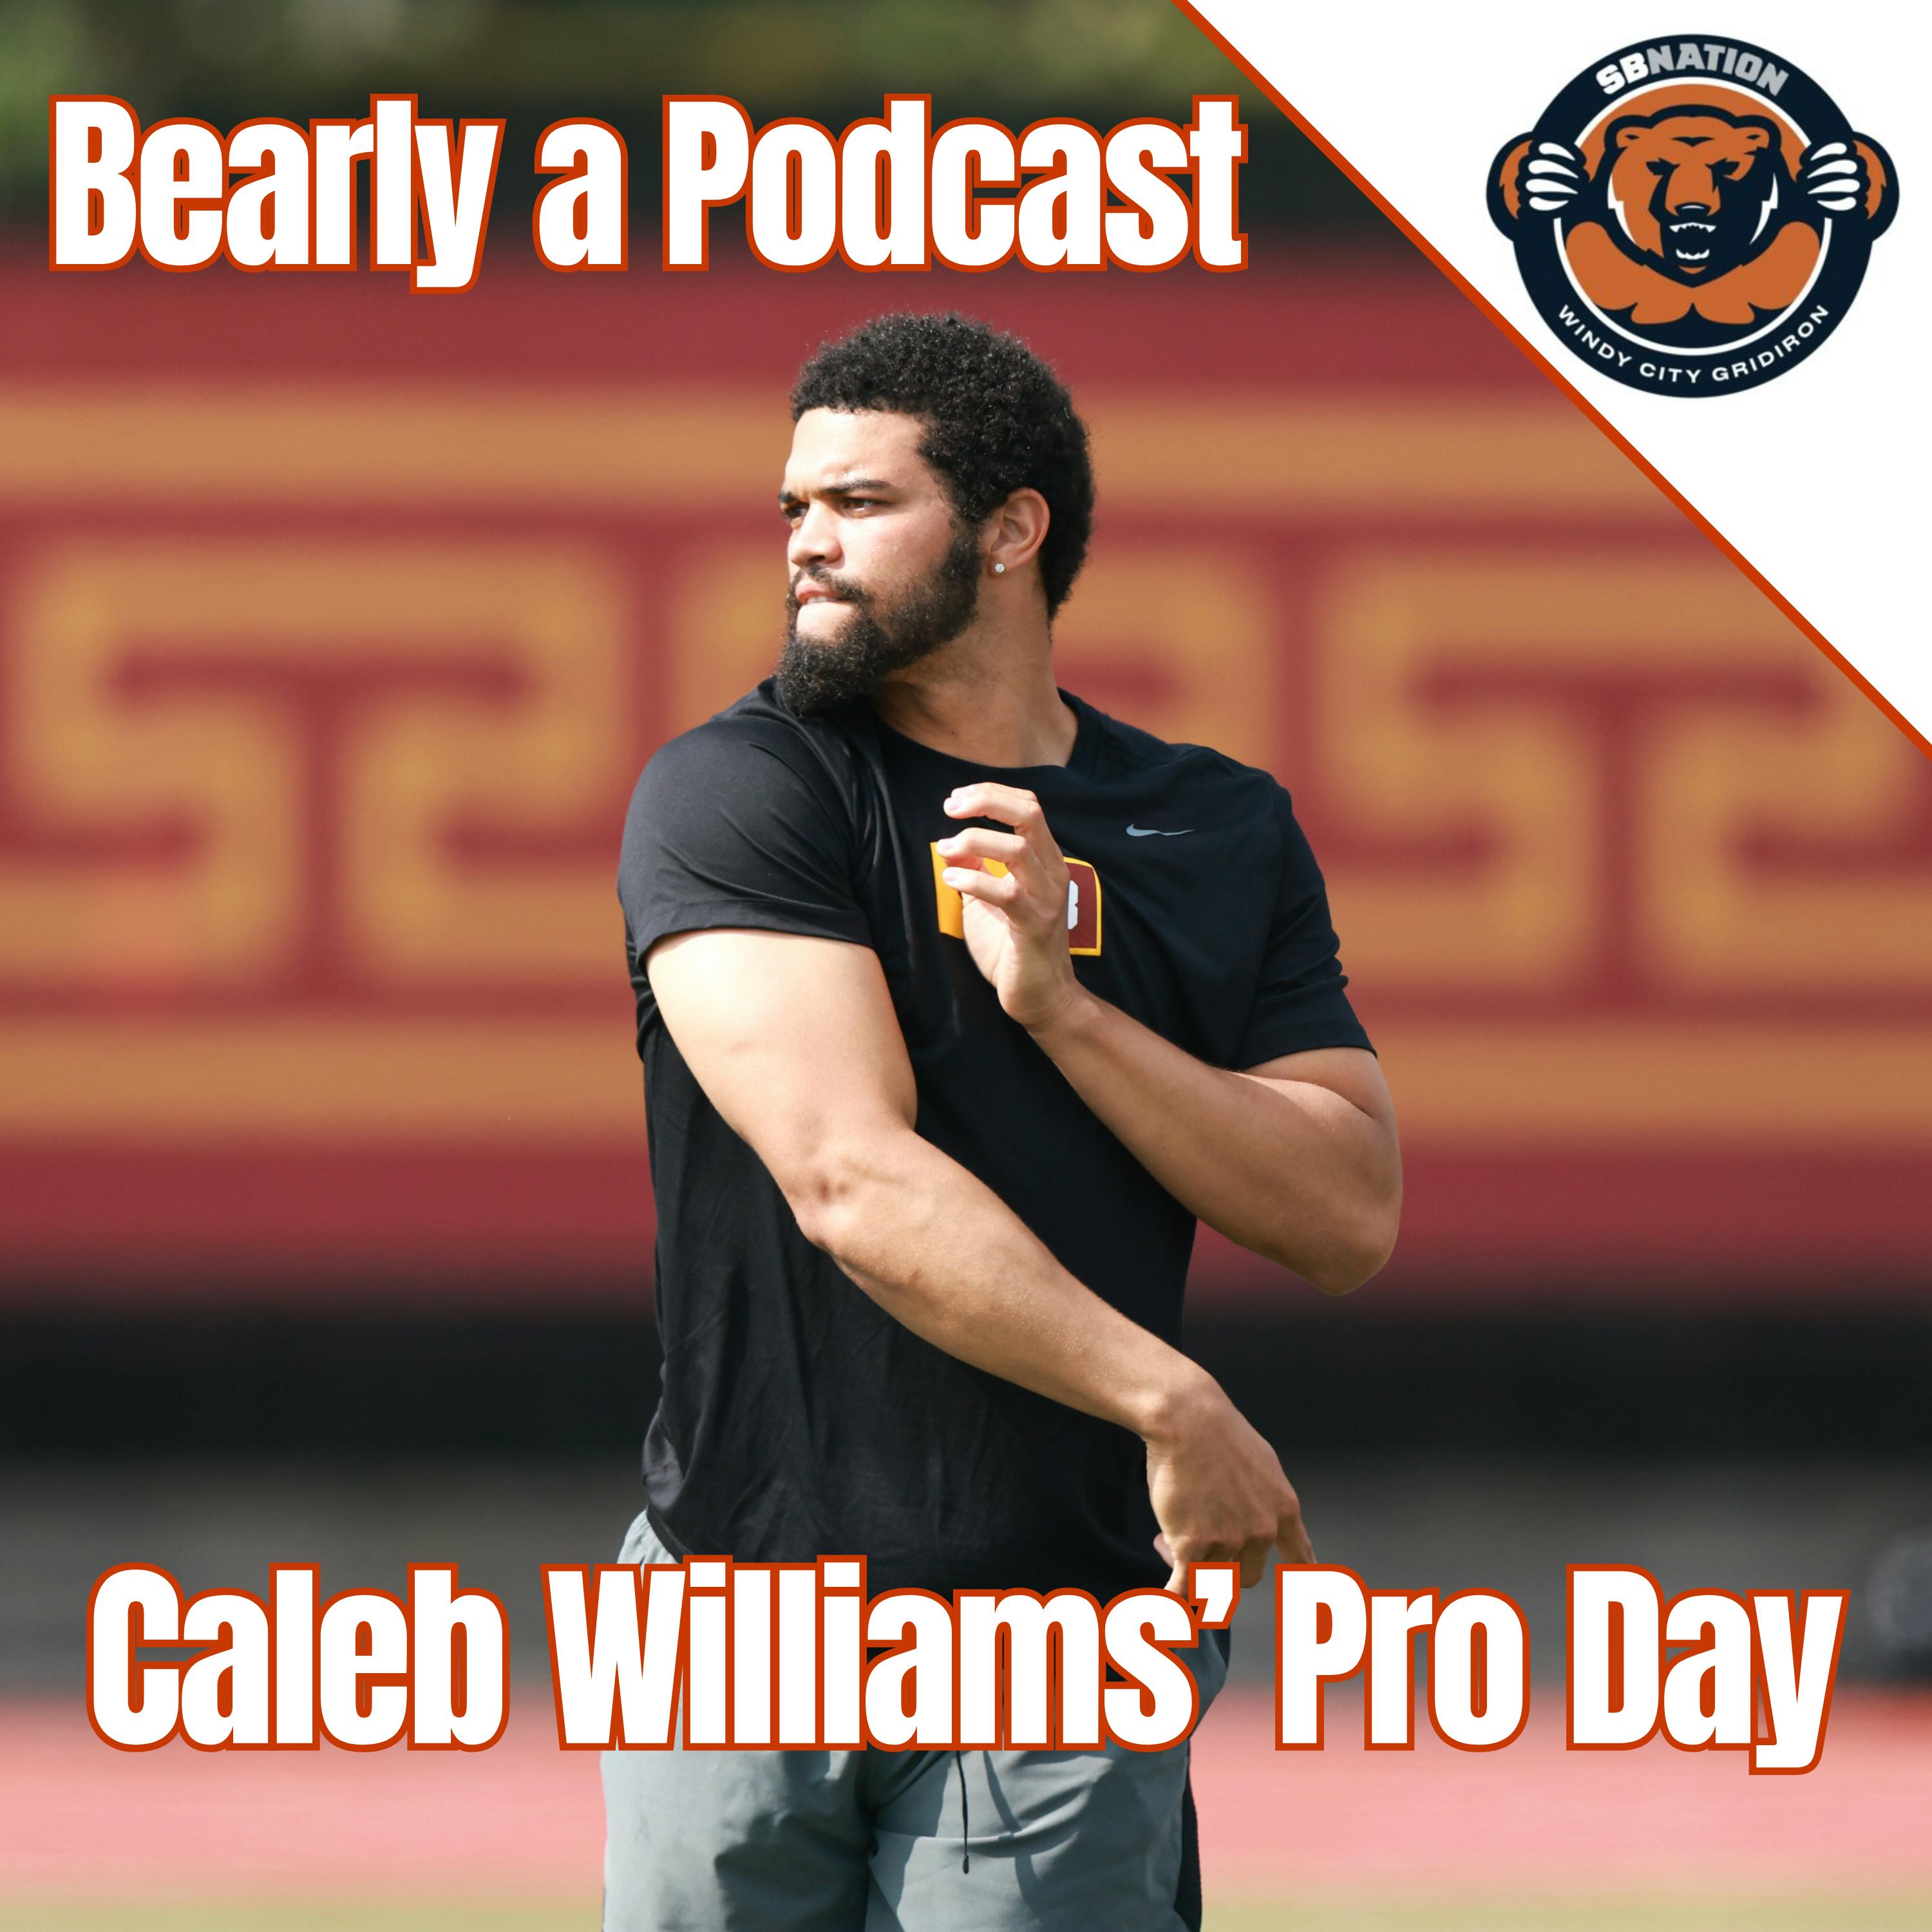 Bearly a Podcast: Caleb Williams Pro Day!